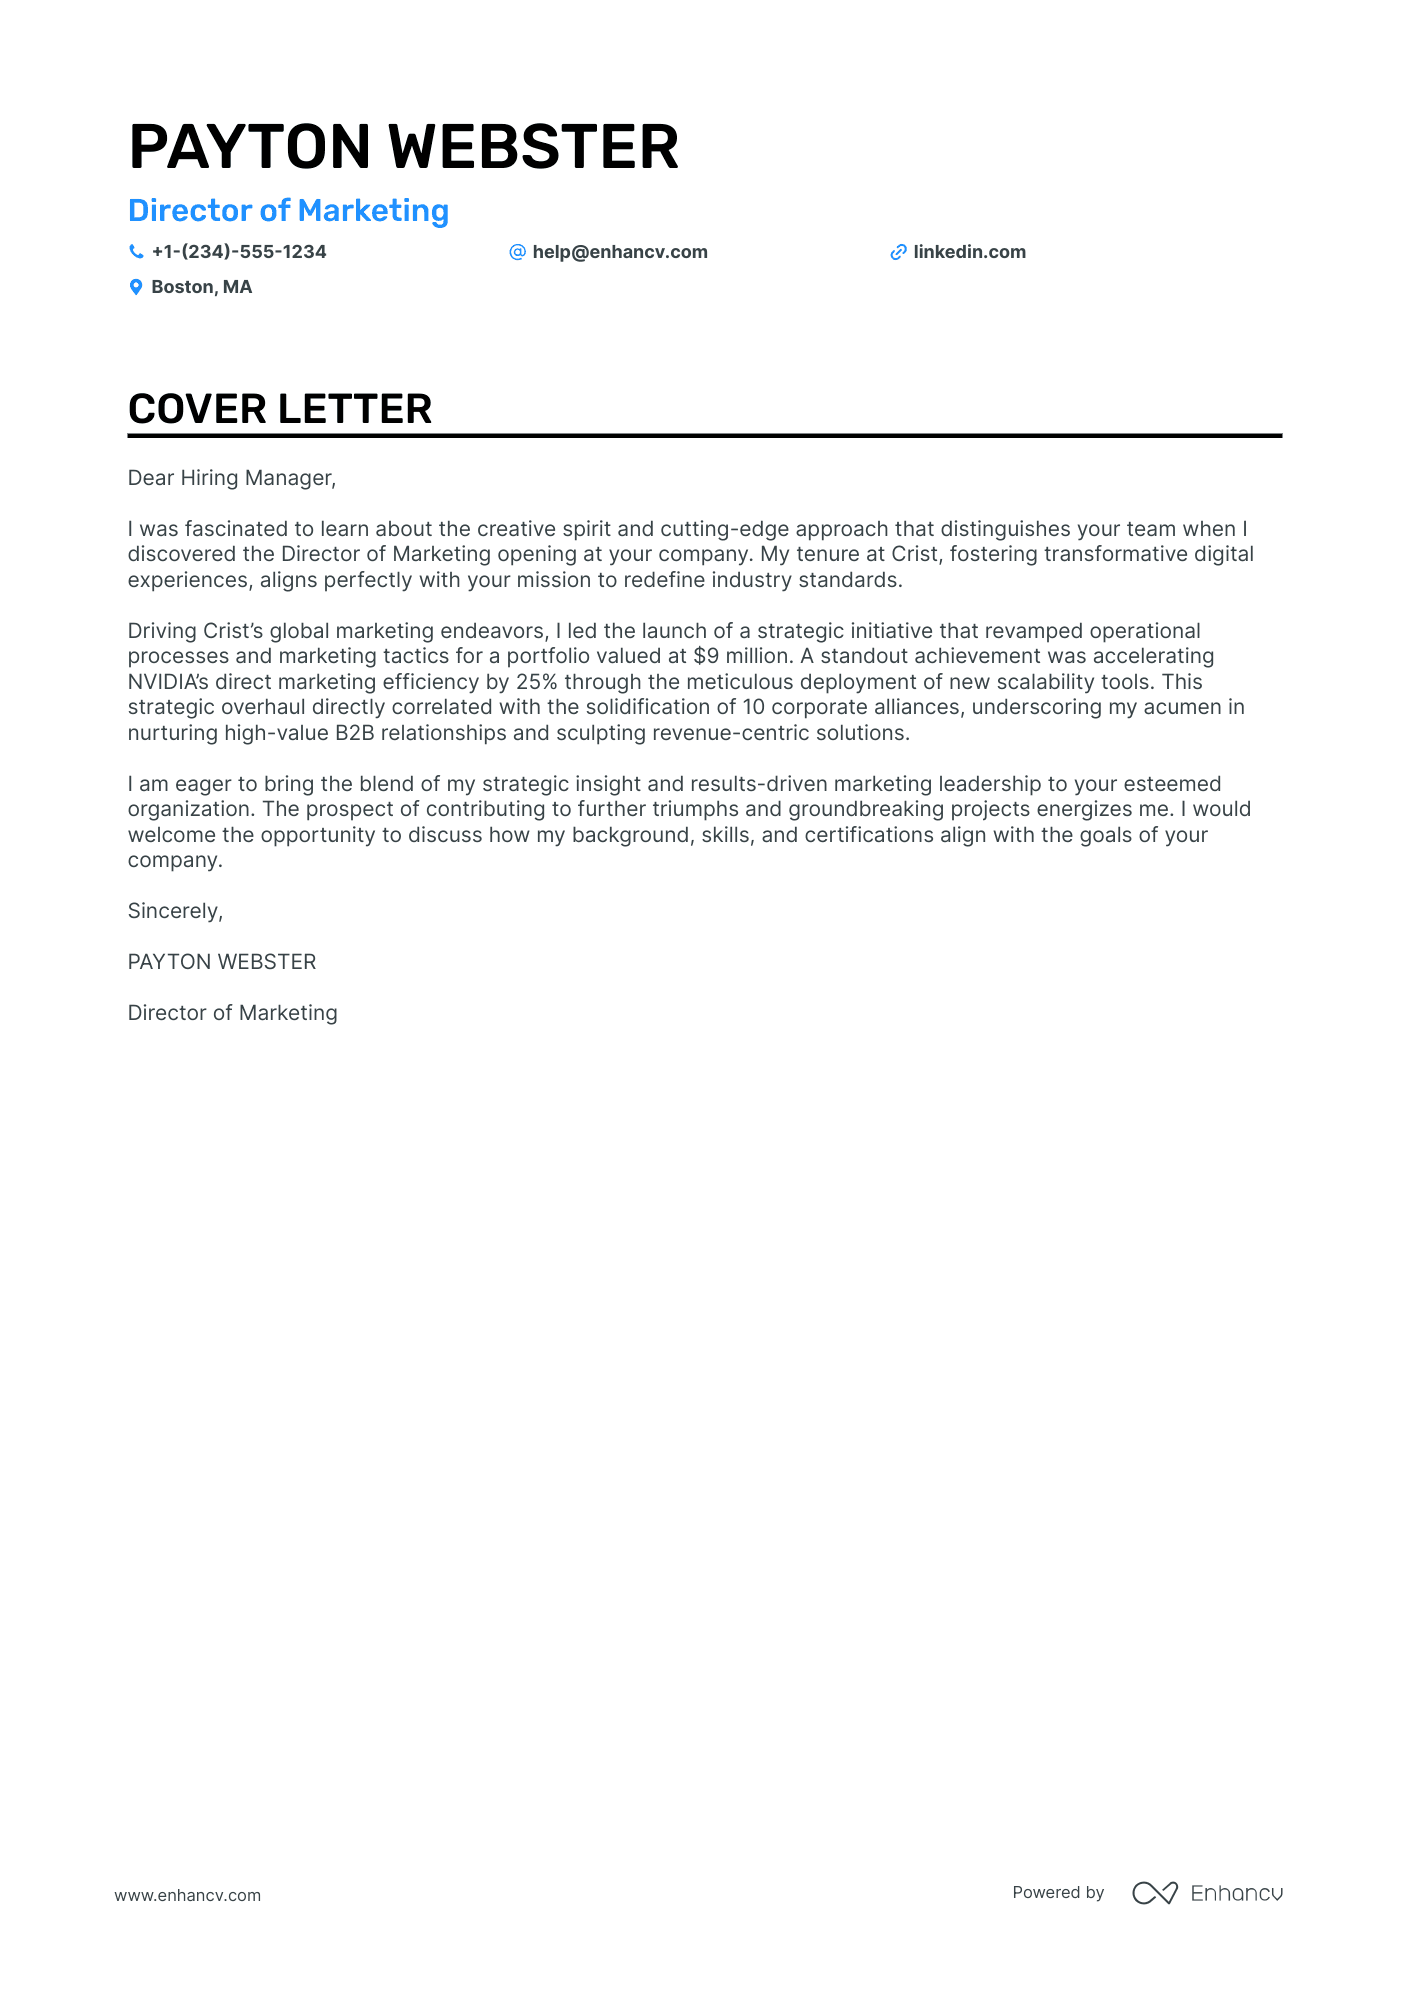 Marketing Director cover letter